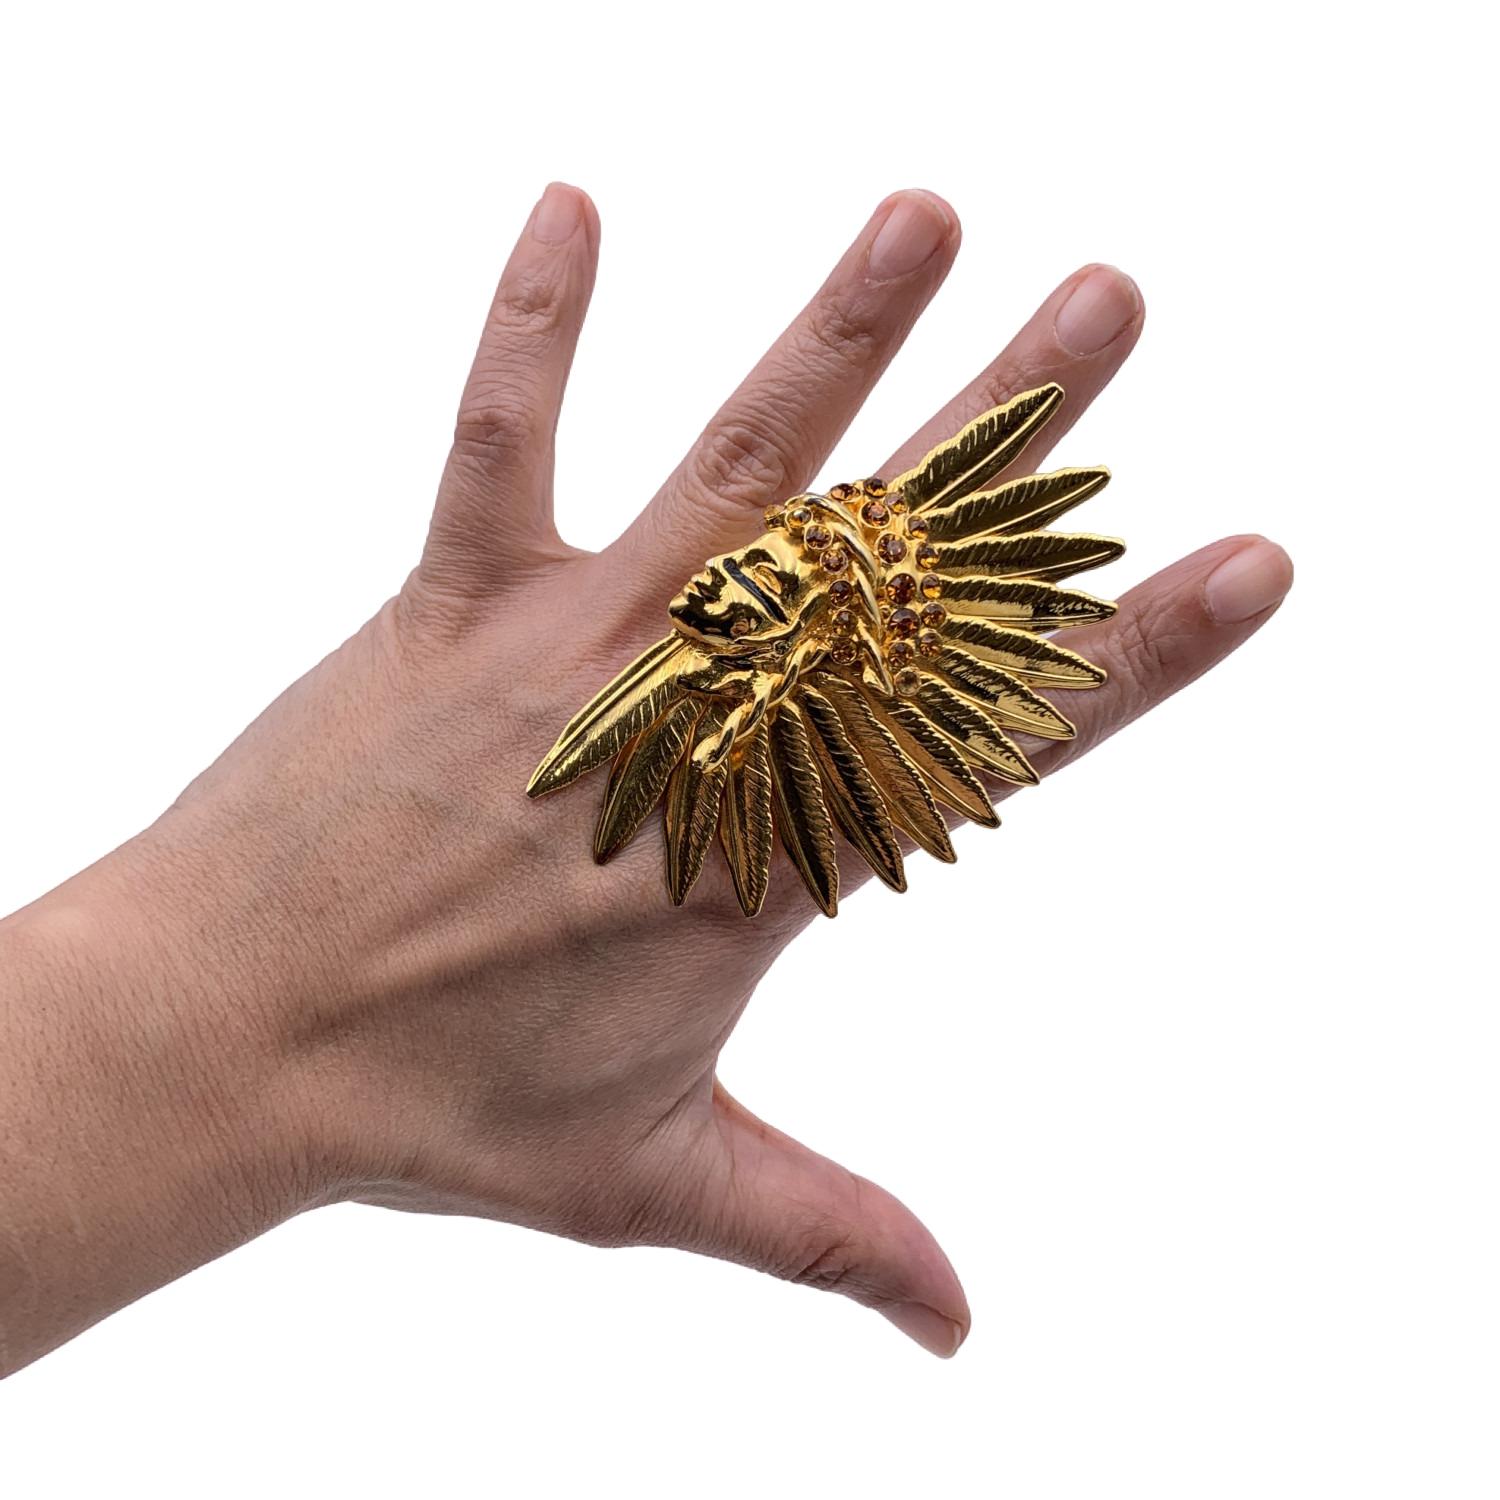 Gianni Versace Rare Gold Metal Native American Indian Crystals Ring In Excellent Condition For Sale In Rome, Rome